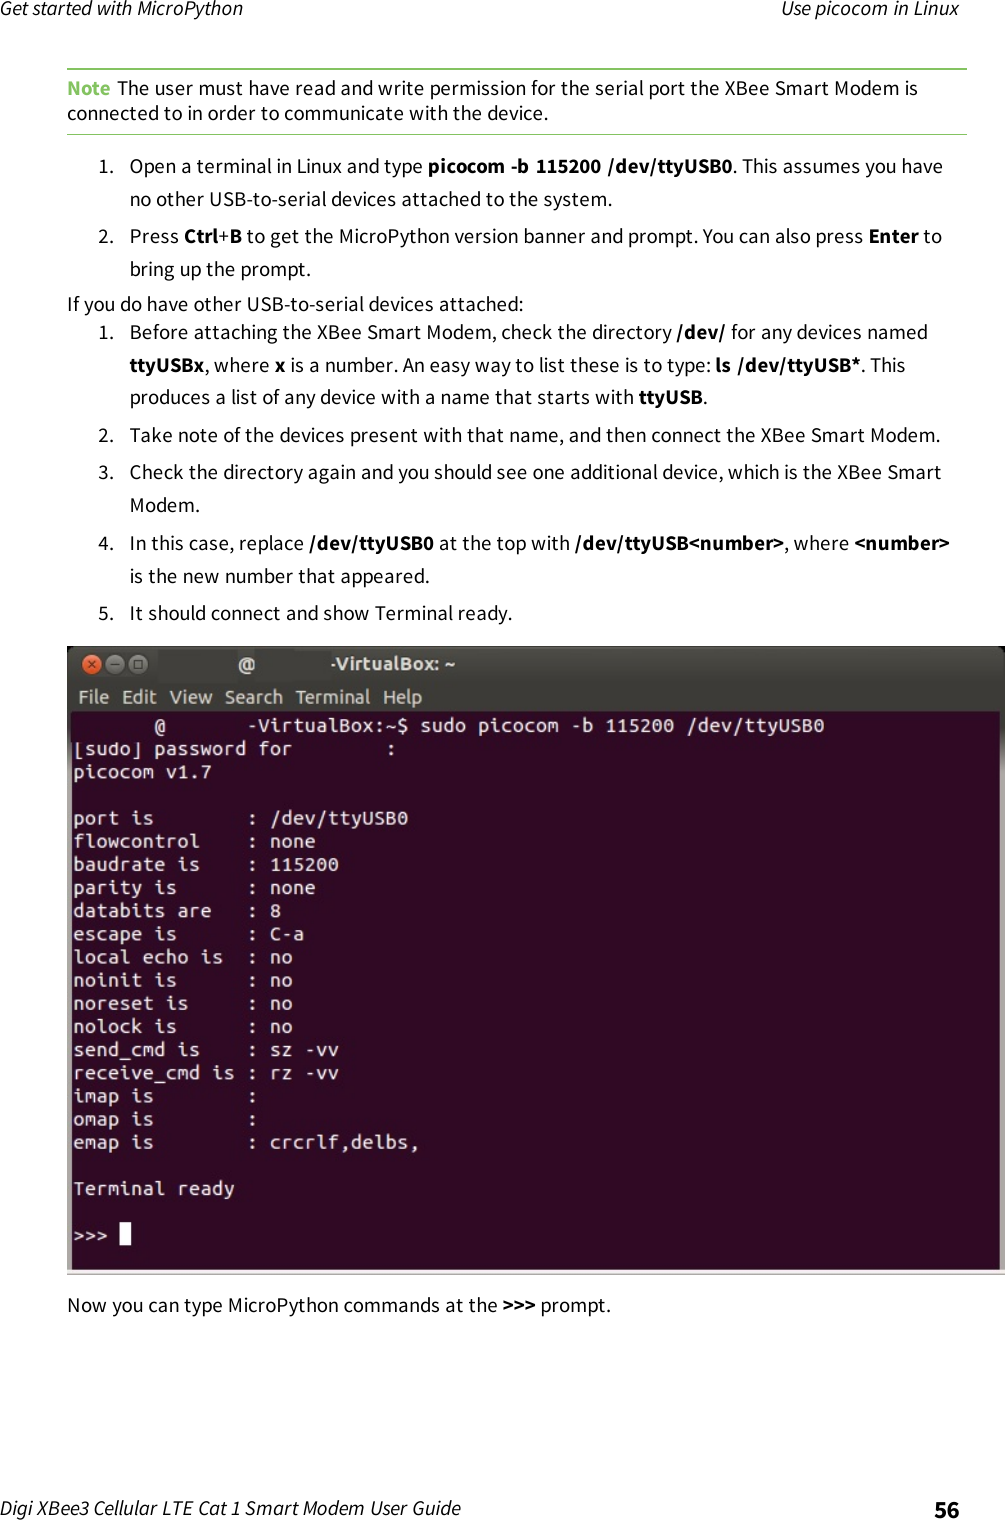 Get started with MicroPython Use picocom in LinuxDigi XBee3 Cellular LTE Cat 1 Smart Modem User Guide 56Note The user must have read and write permission for the serial port the XBee Smart Modem isconnected to in order to communicate with the device.1. Open a terminal in Linux and type picocom -b 115200 /dev/ttyUSB0. This assumes you haveno other USB-to-serial devices attached to the system.2. Press Ctrl+Bto get the MicroPython version banner and prompt. You can also press Enter tobring up the prompt.If you do have other USB-to-serial devices attached:1. Before attaching the XBee Smart Modem, check the directory /dev/ for any devices namedttyUSBx, where xis a number. An easy way to list these is to type: ls /dev/ttyUSB*. Thisproduces a list of any device with a name that starts with ttyUSB.2. Take note of the devices present with that name, and then connect the XBee Smart Modem.3. Check the directory again and you should see one additional device, which is the XBee SmartModem.4. In this case, replace /dev/ttyUSB0 at the top with /dev/ttyUSB&lt;number&gt;, where &lt;number&gt;is the new number that appeared.5. It should connect and show Terminal ready.Now you can type MicroPython commands at the &gt;&gt;&gt; prompt.